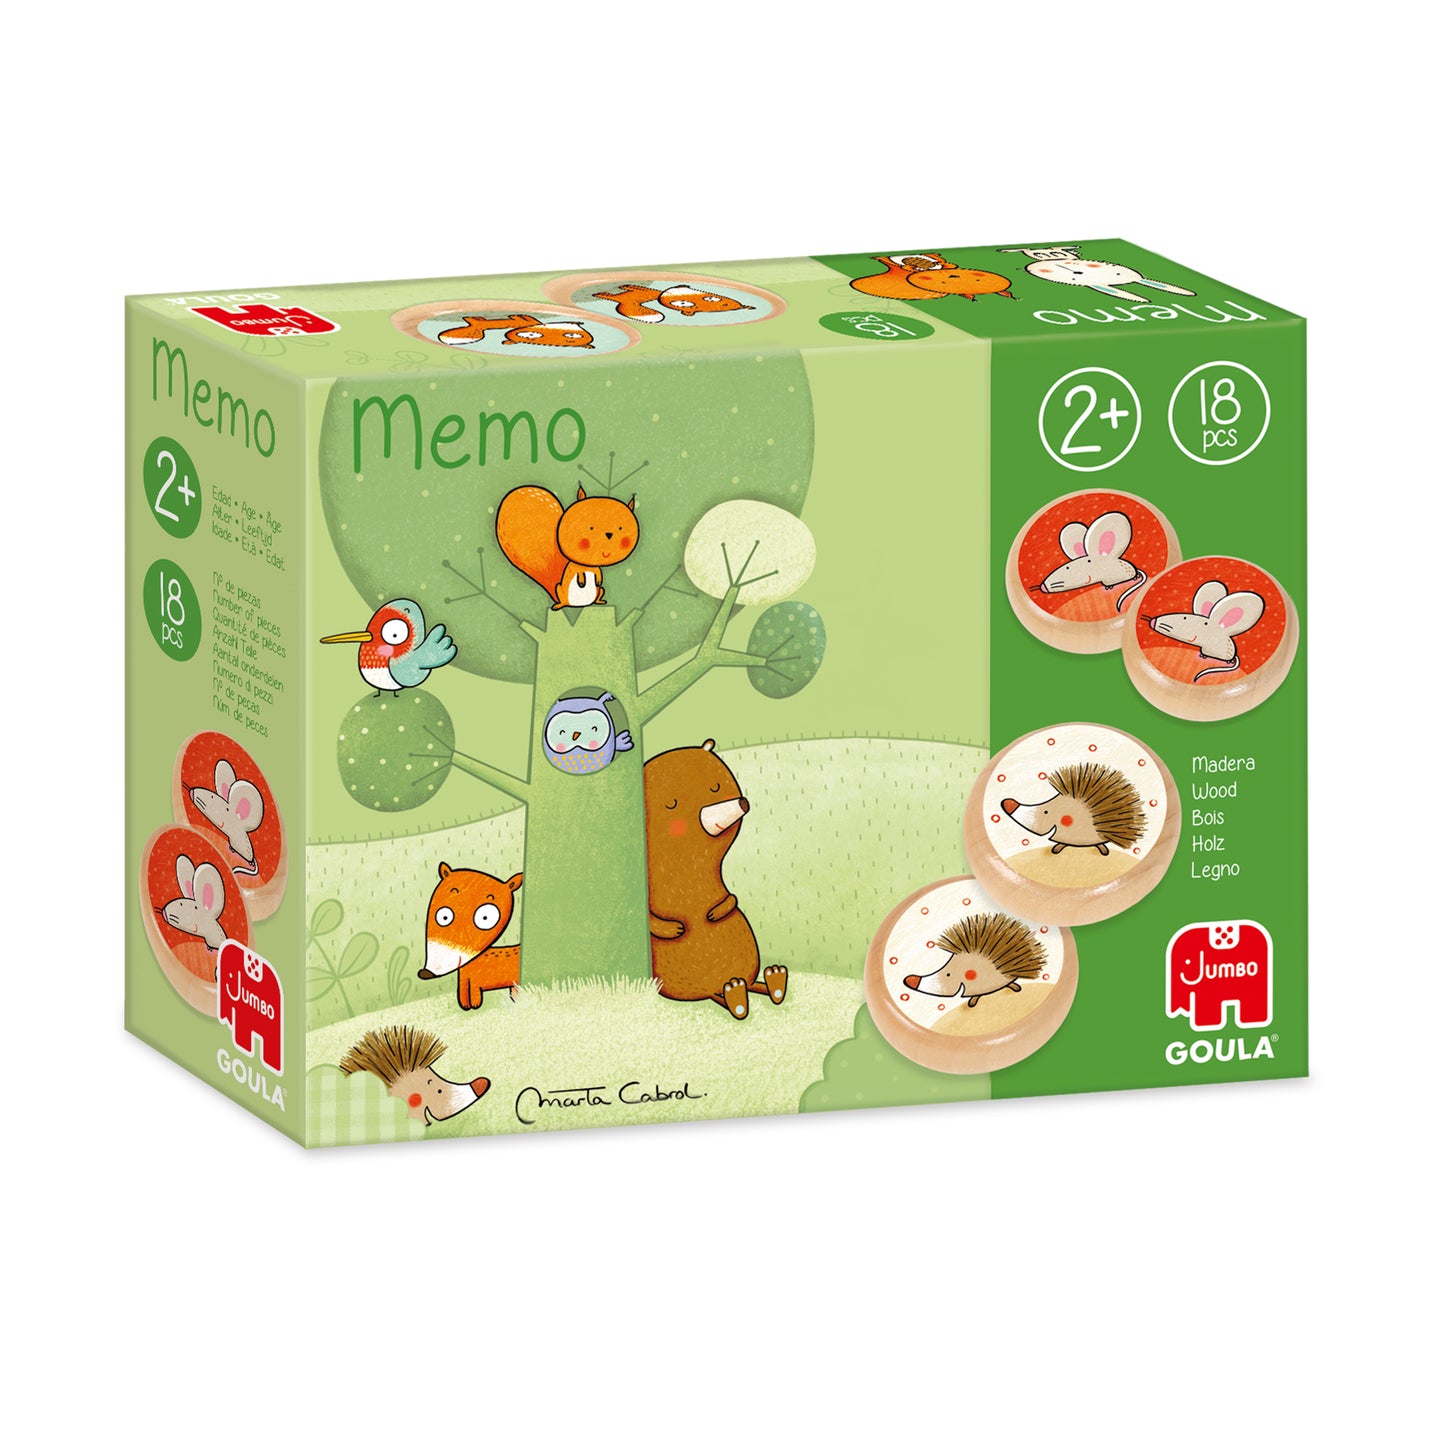 Memo Tom and his forest friends - product image - Jumboplay.com